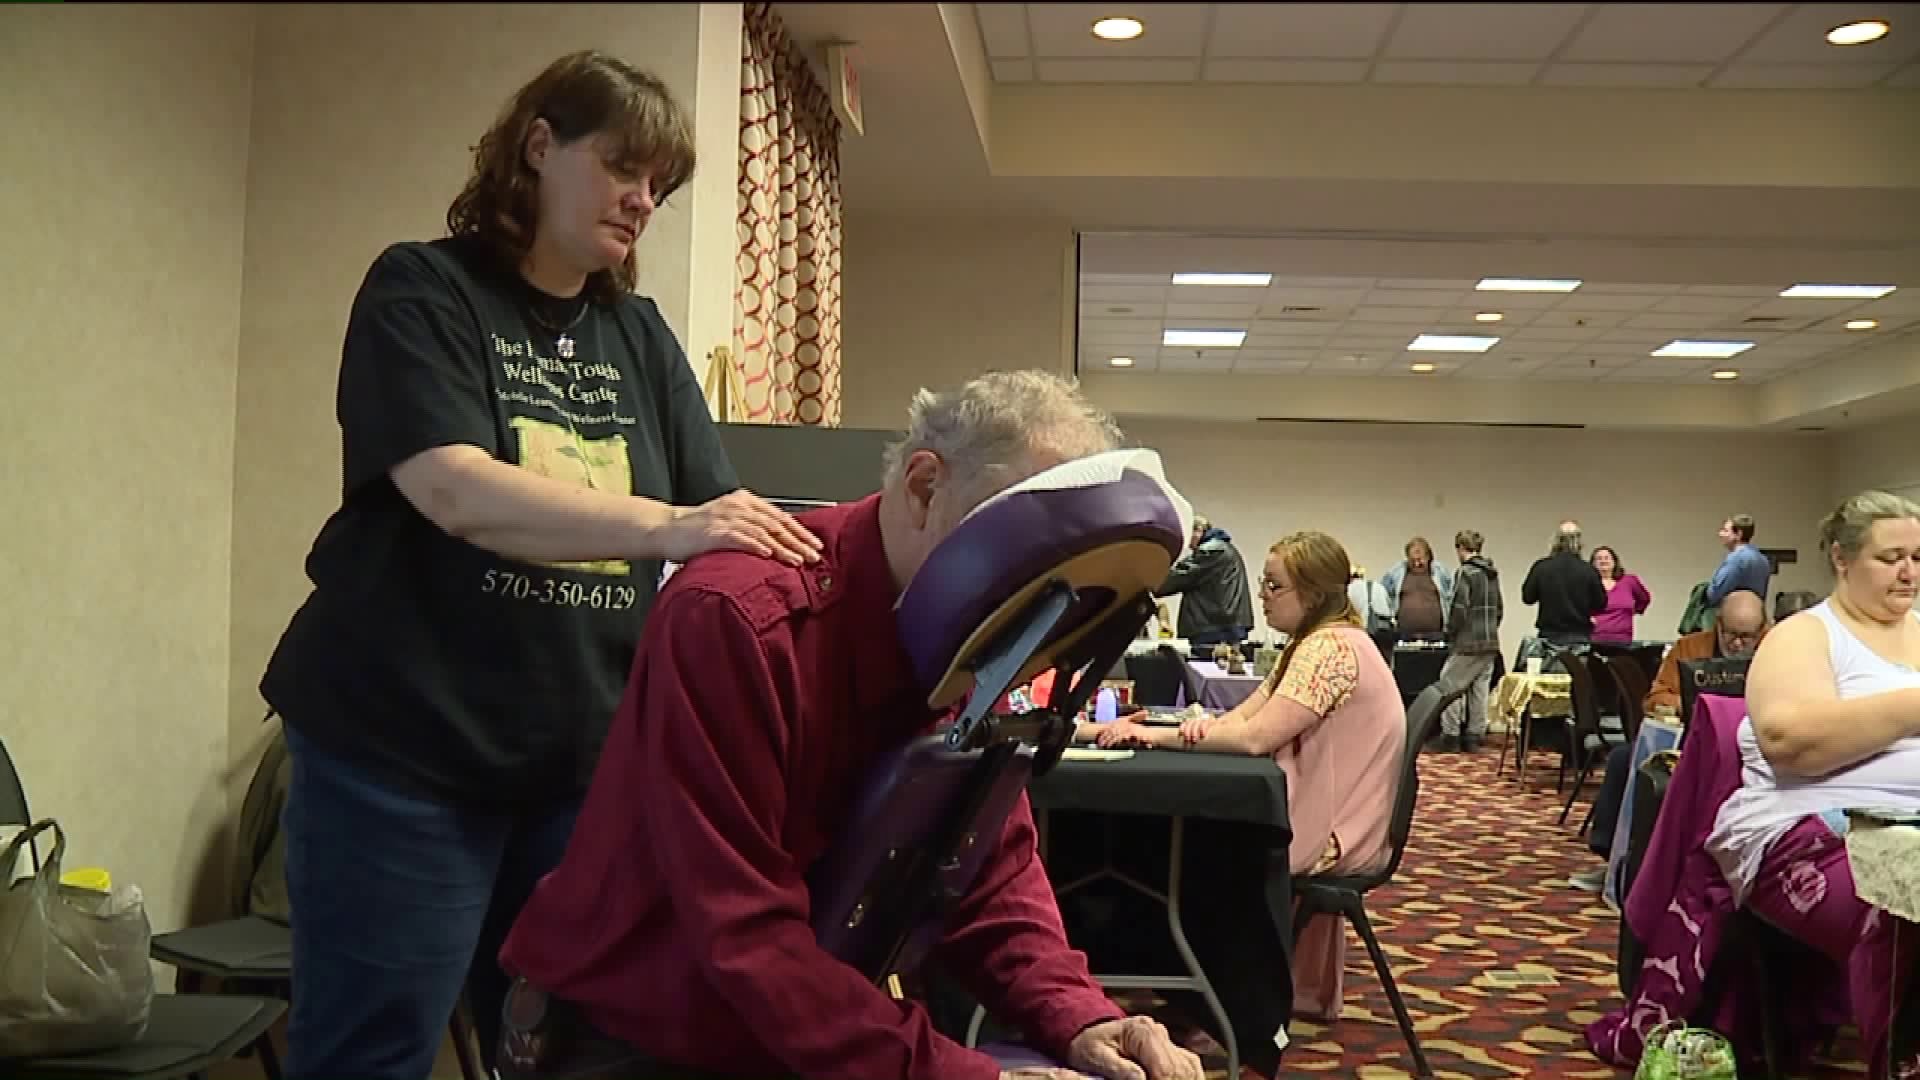 Fair For Holistic Healing Held in Luzerne County